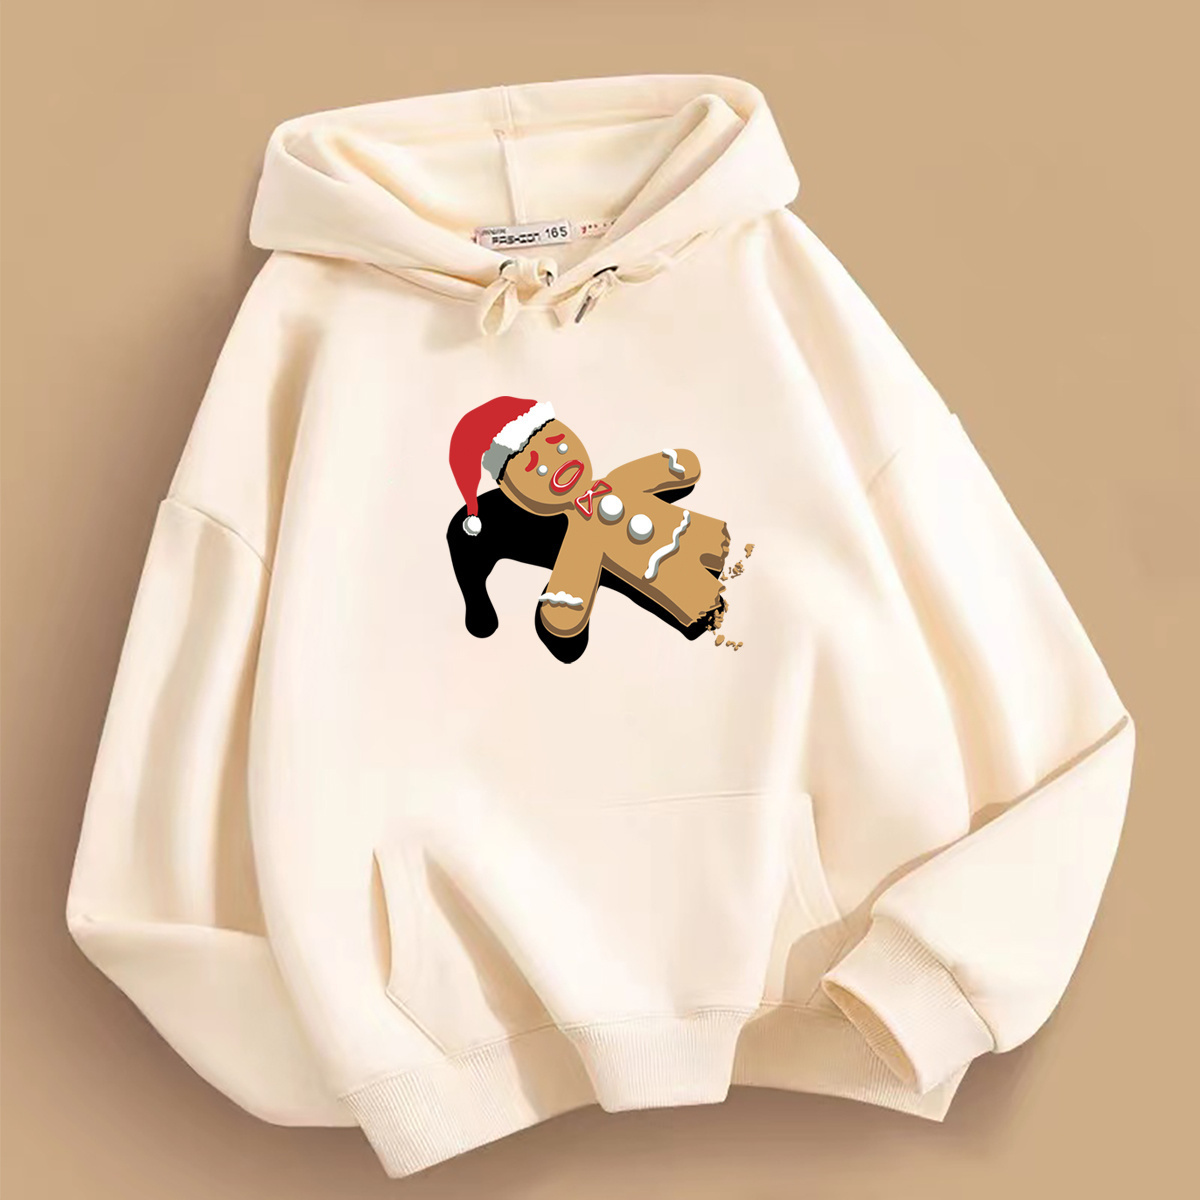 Dabbing Gingerbread Person (DTF Transfer)